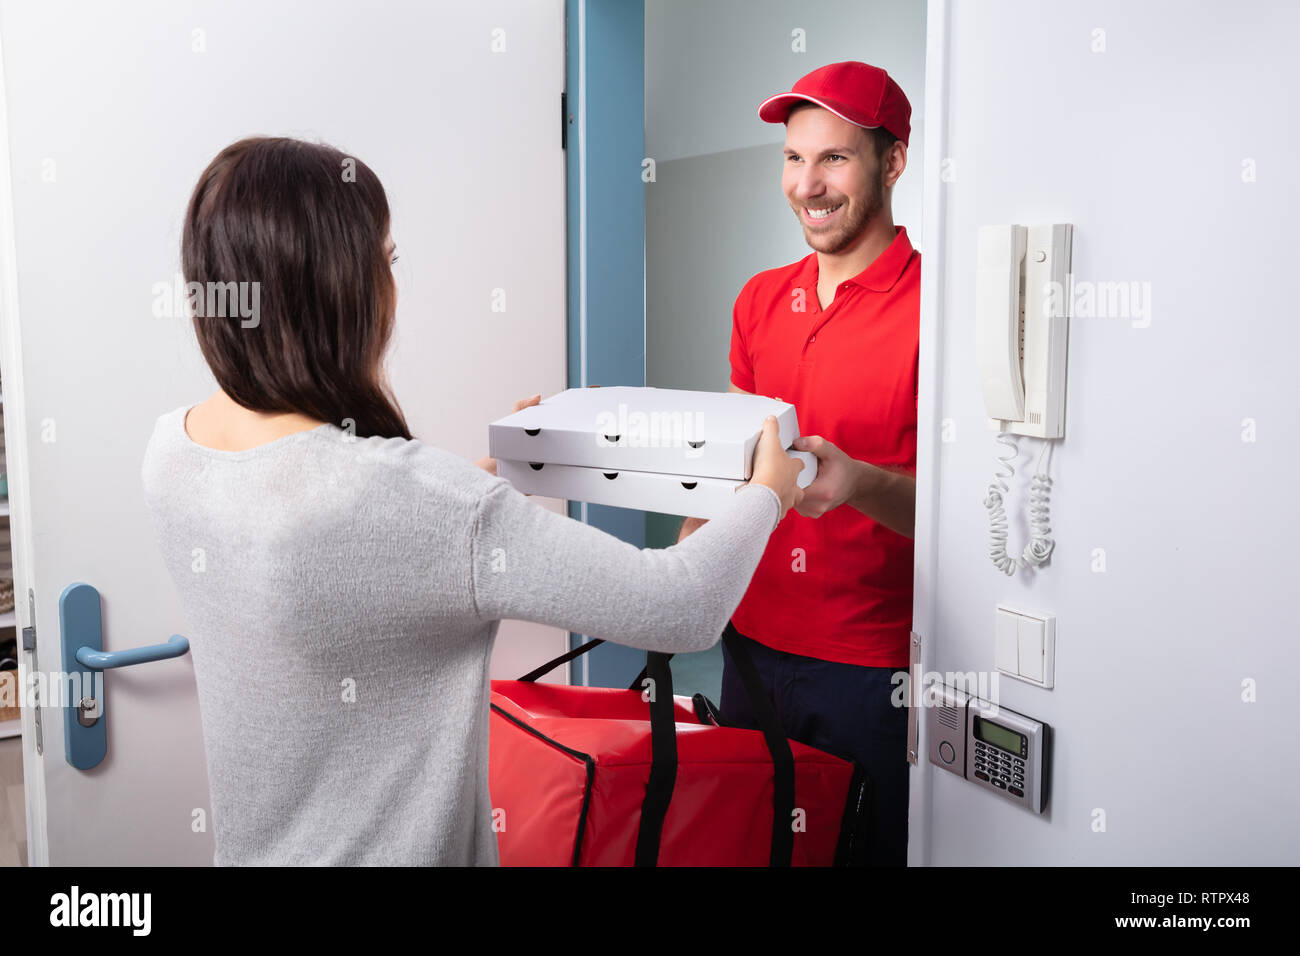 Smiling Woman Receiving Pizza From Delivery Man At Home Stock Photo